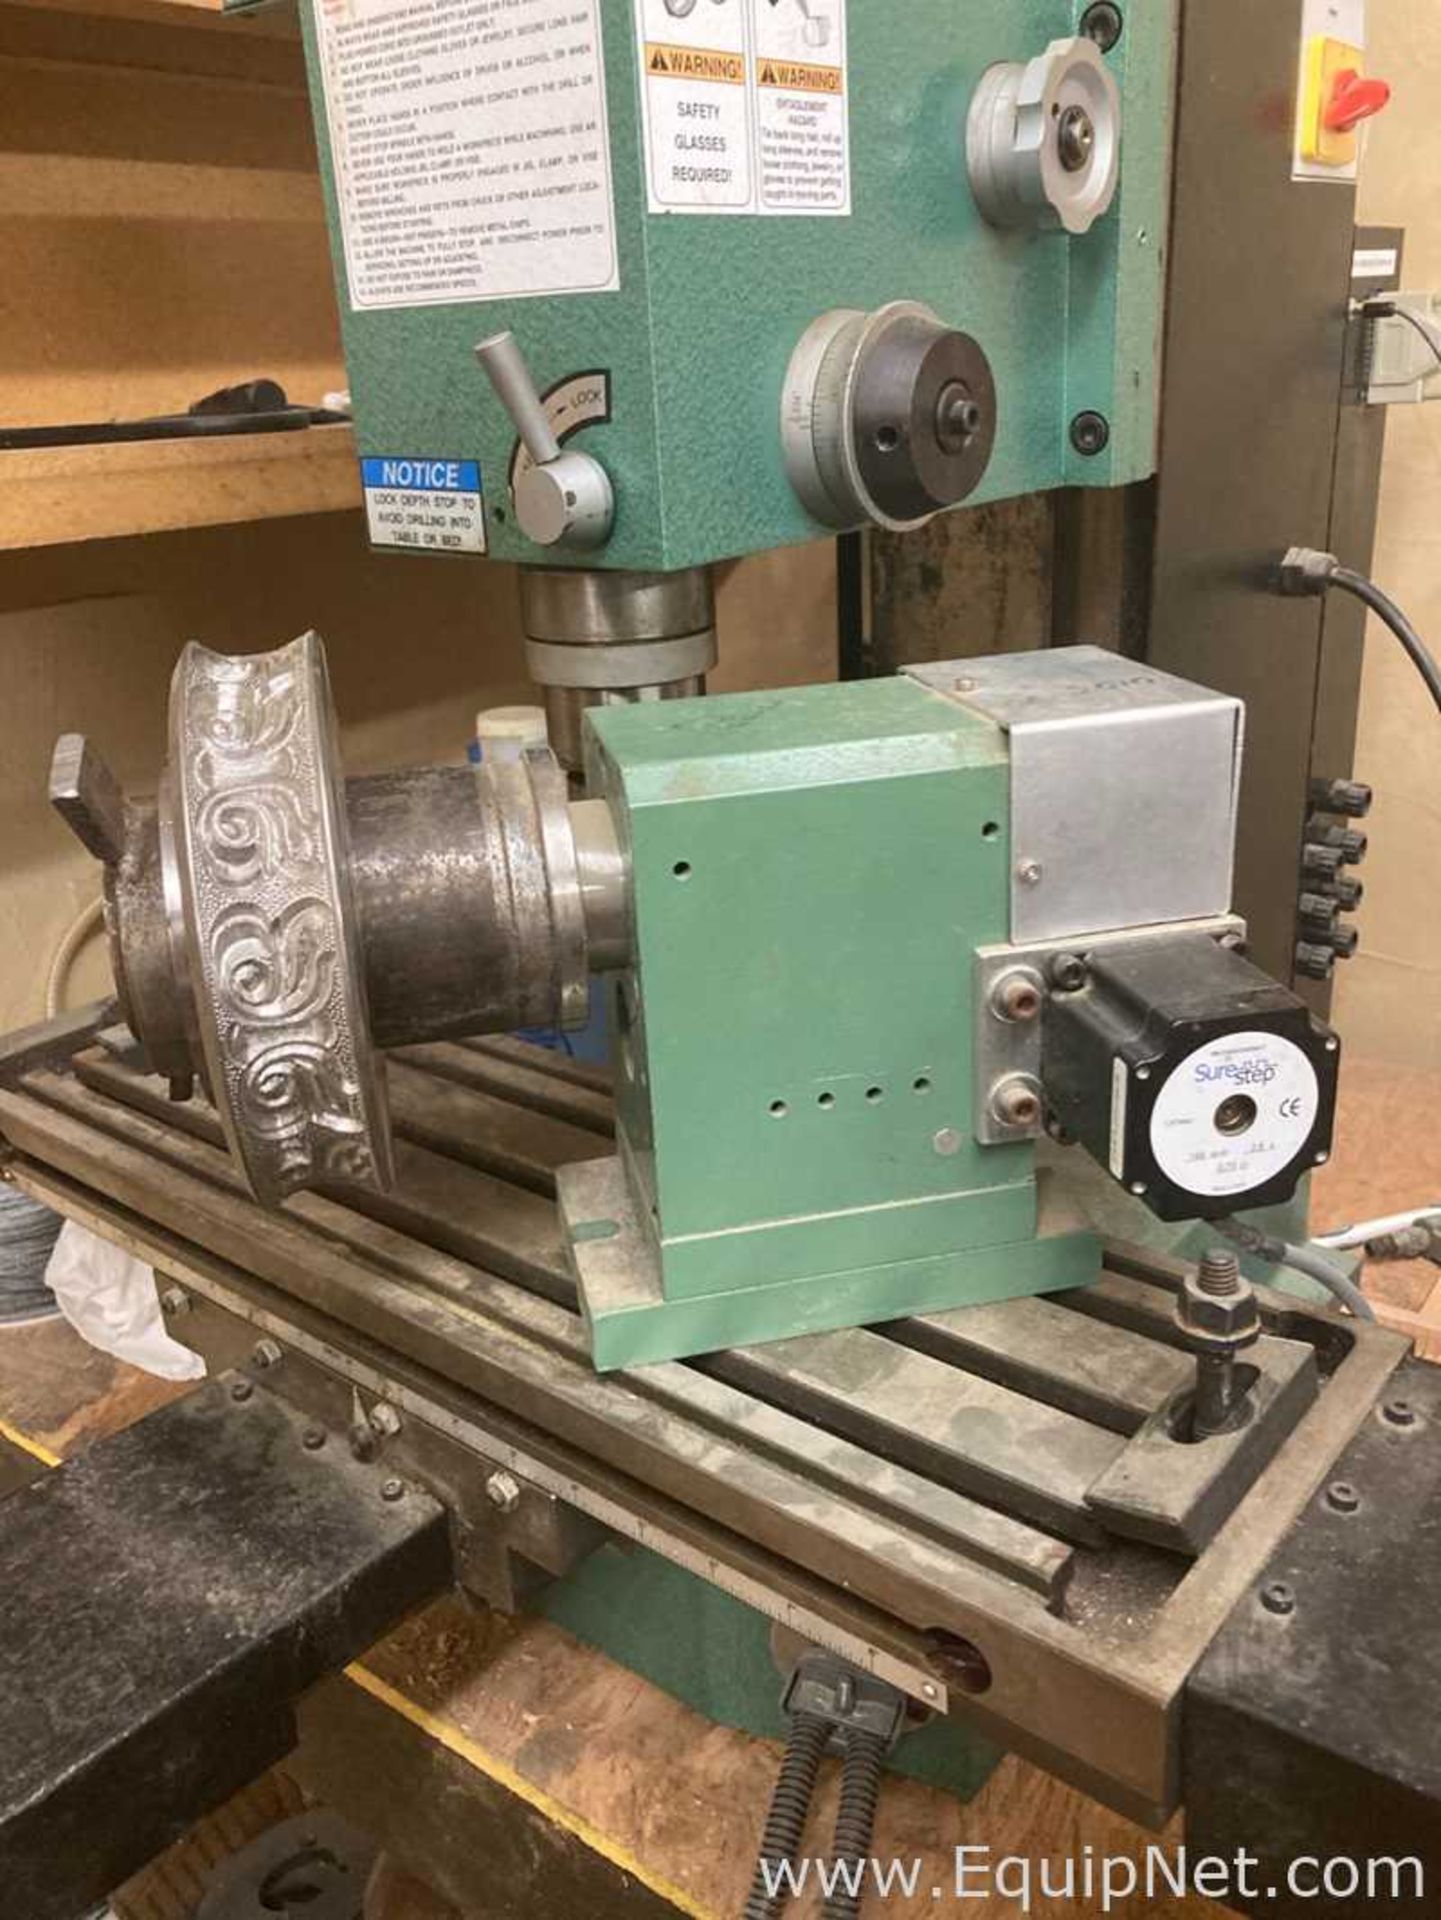 EQUIPNET LISTING #842878; REMOVAL COST: TBD; DESCRIPTION: KDN Tool and Automation X3 CNC Milling - Image 5 of 7